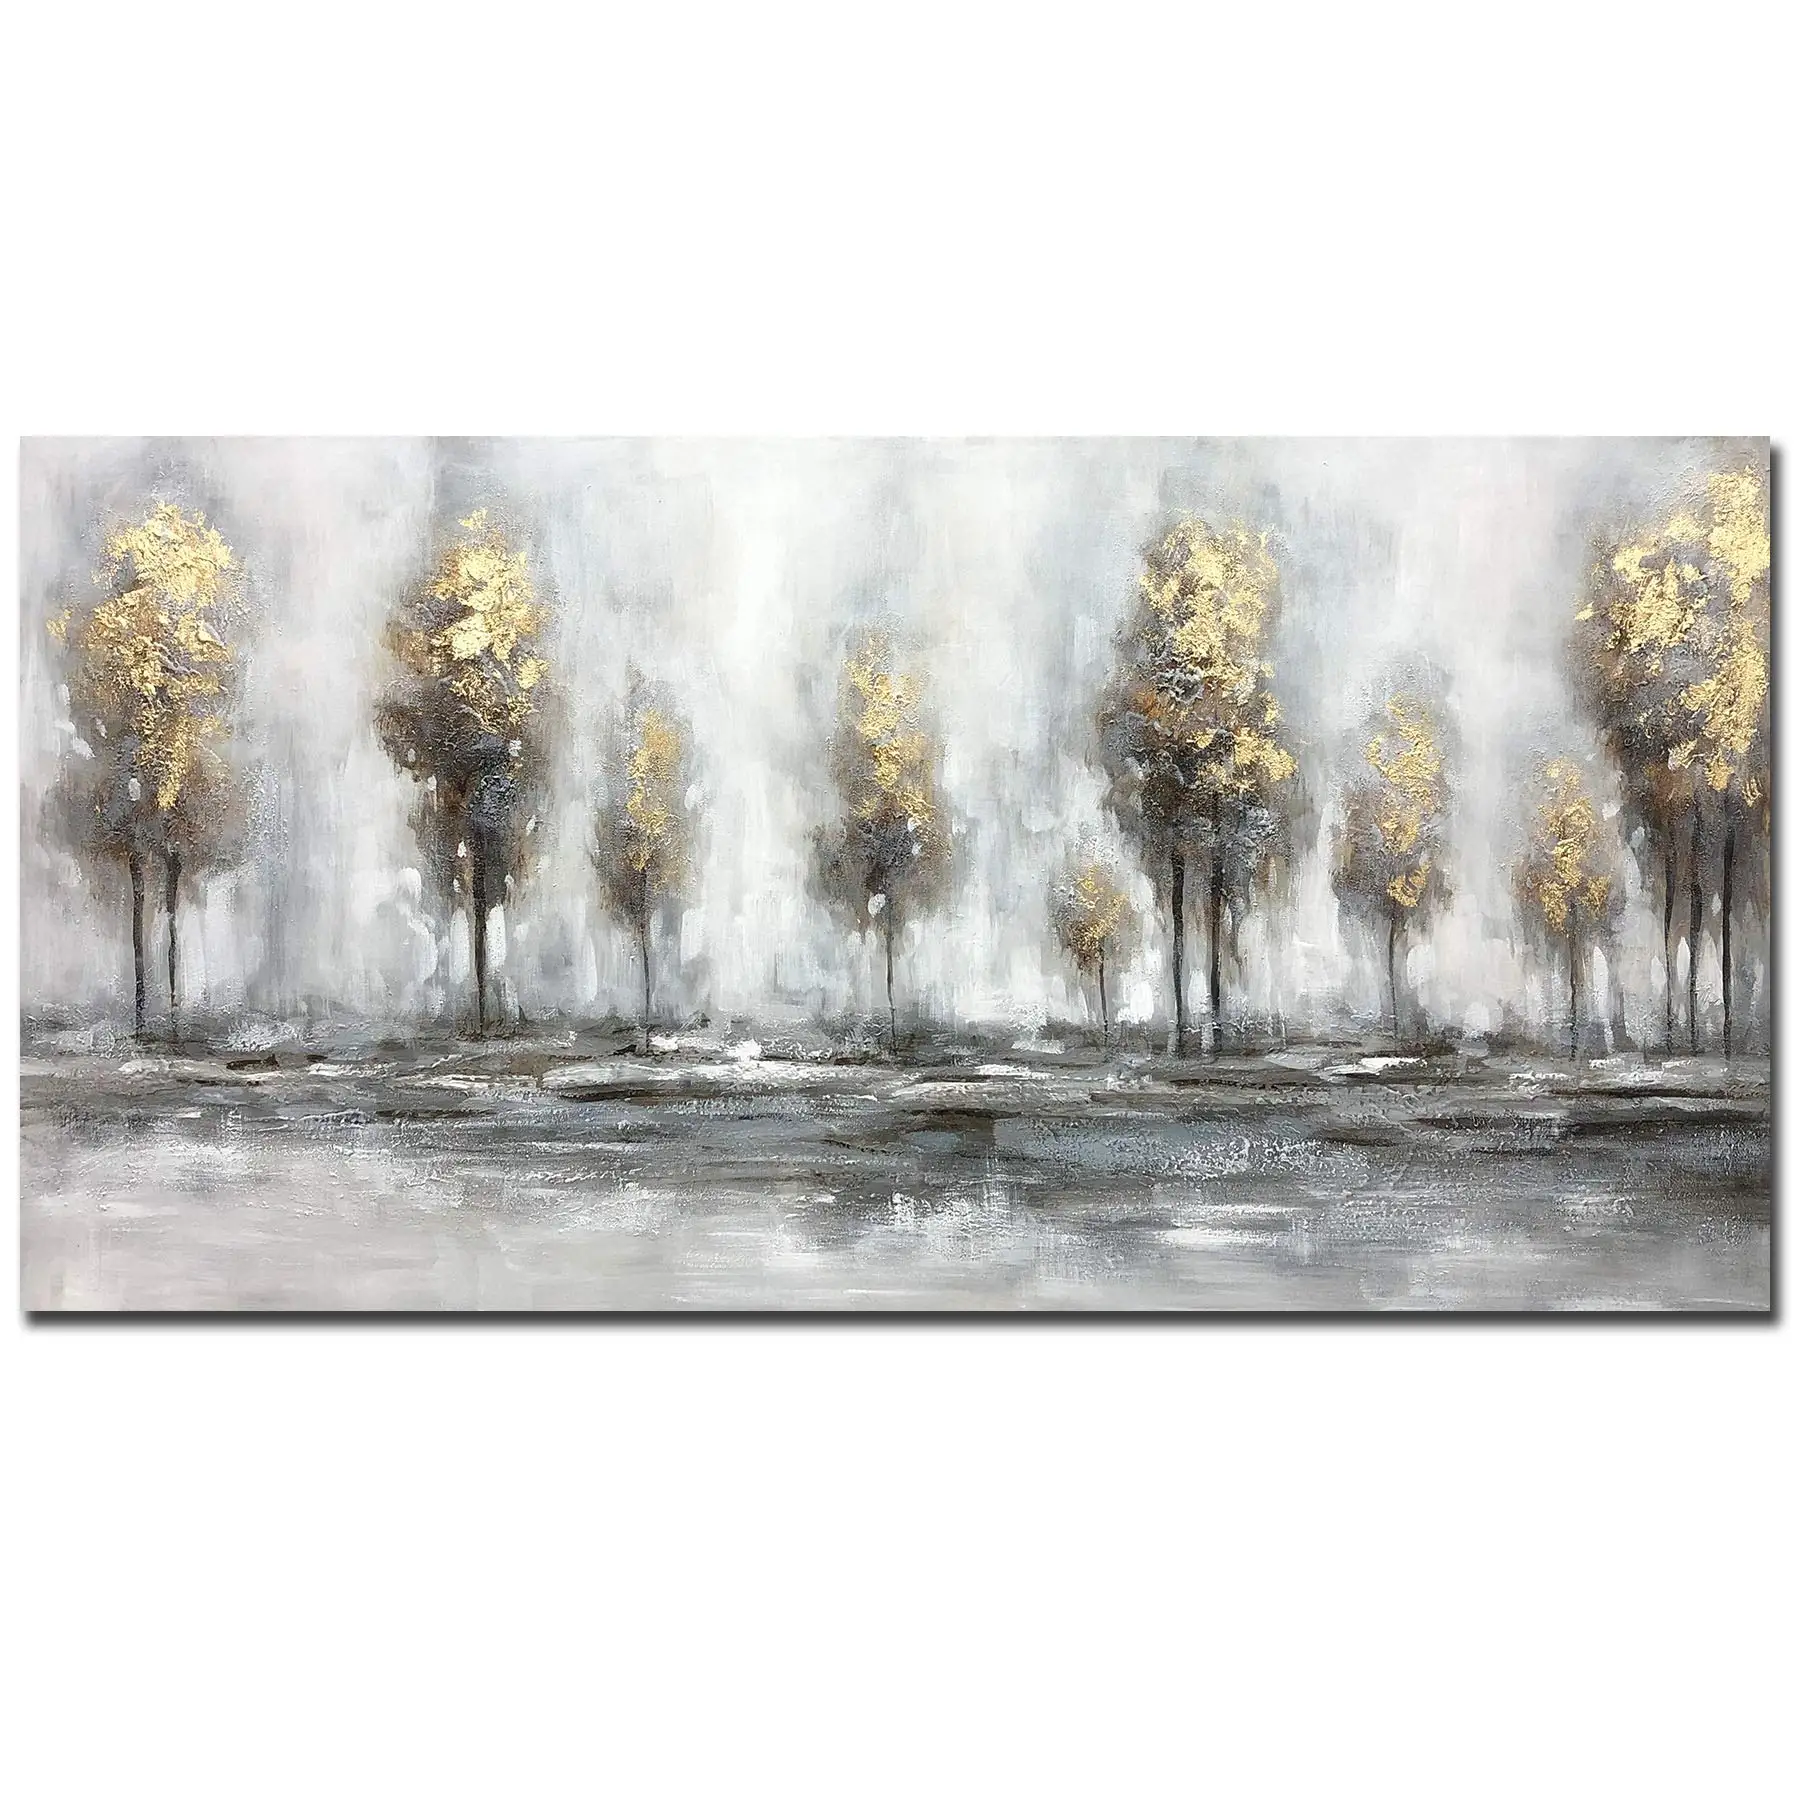 

Hand-Painted Grey Gold Oil Paintings Absract Forest Landscape Artwork Nature Scenery Canvas Home Wall Art Golden Trees No Framed